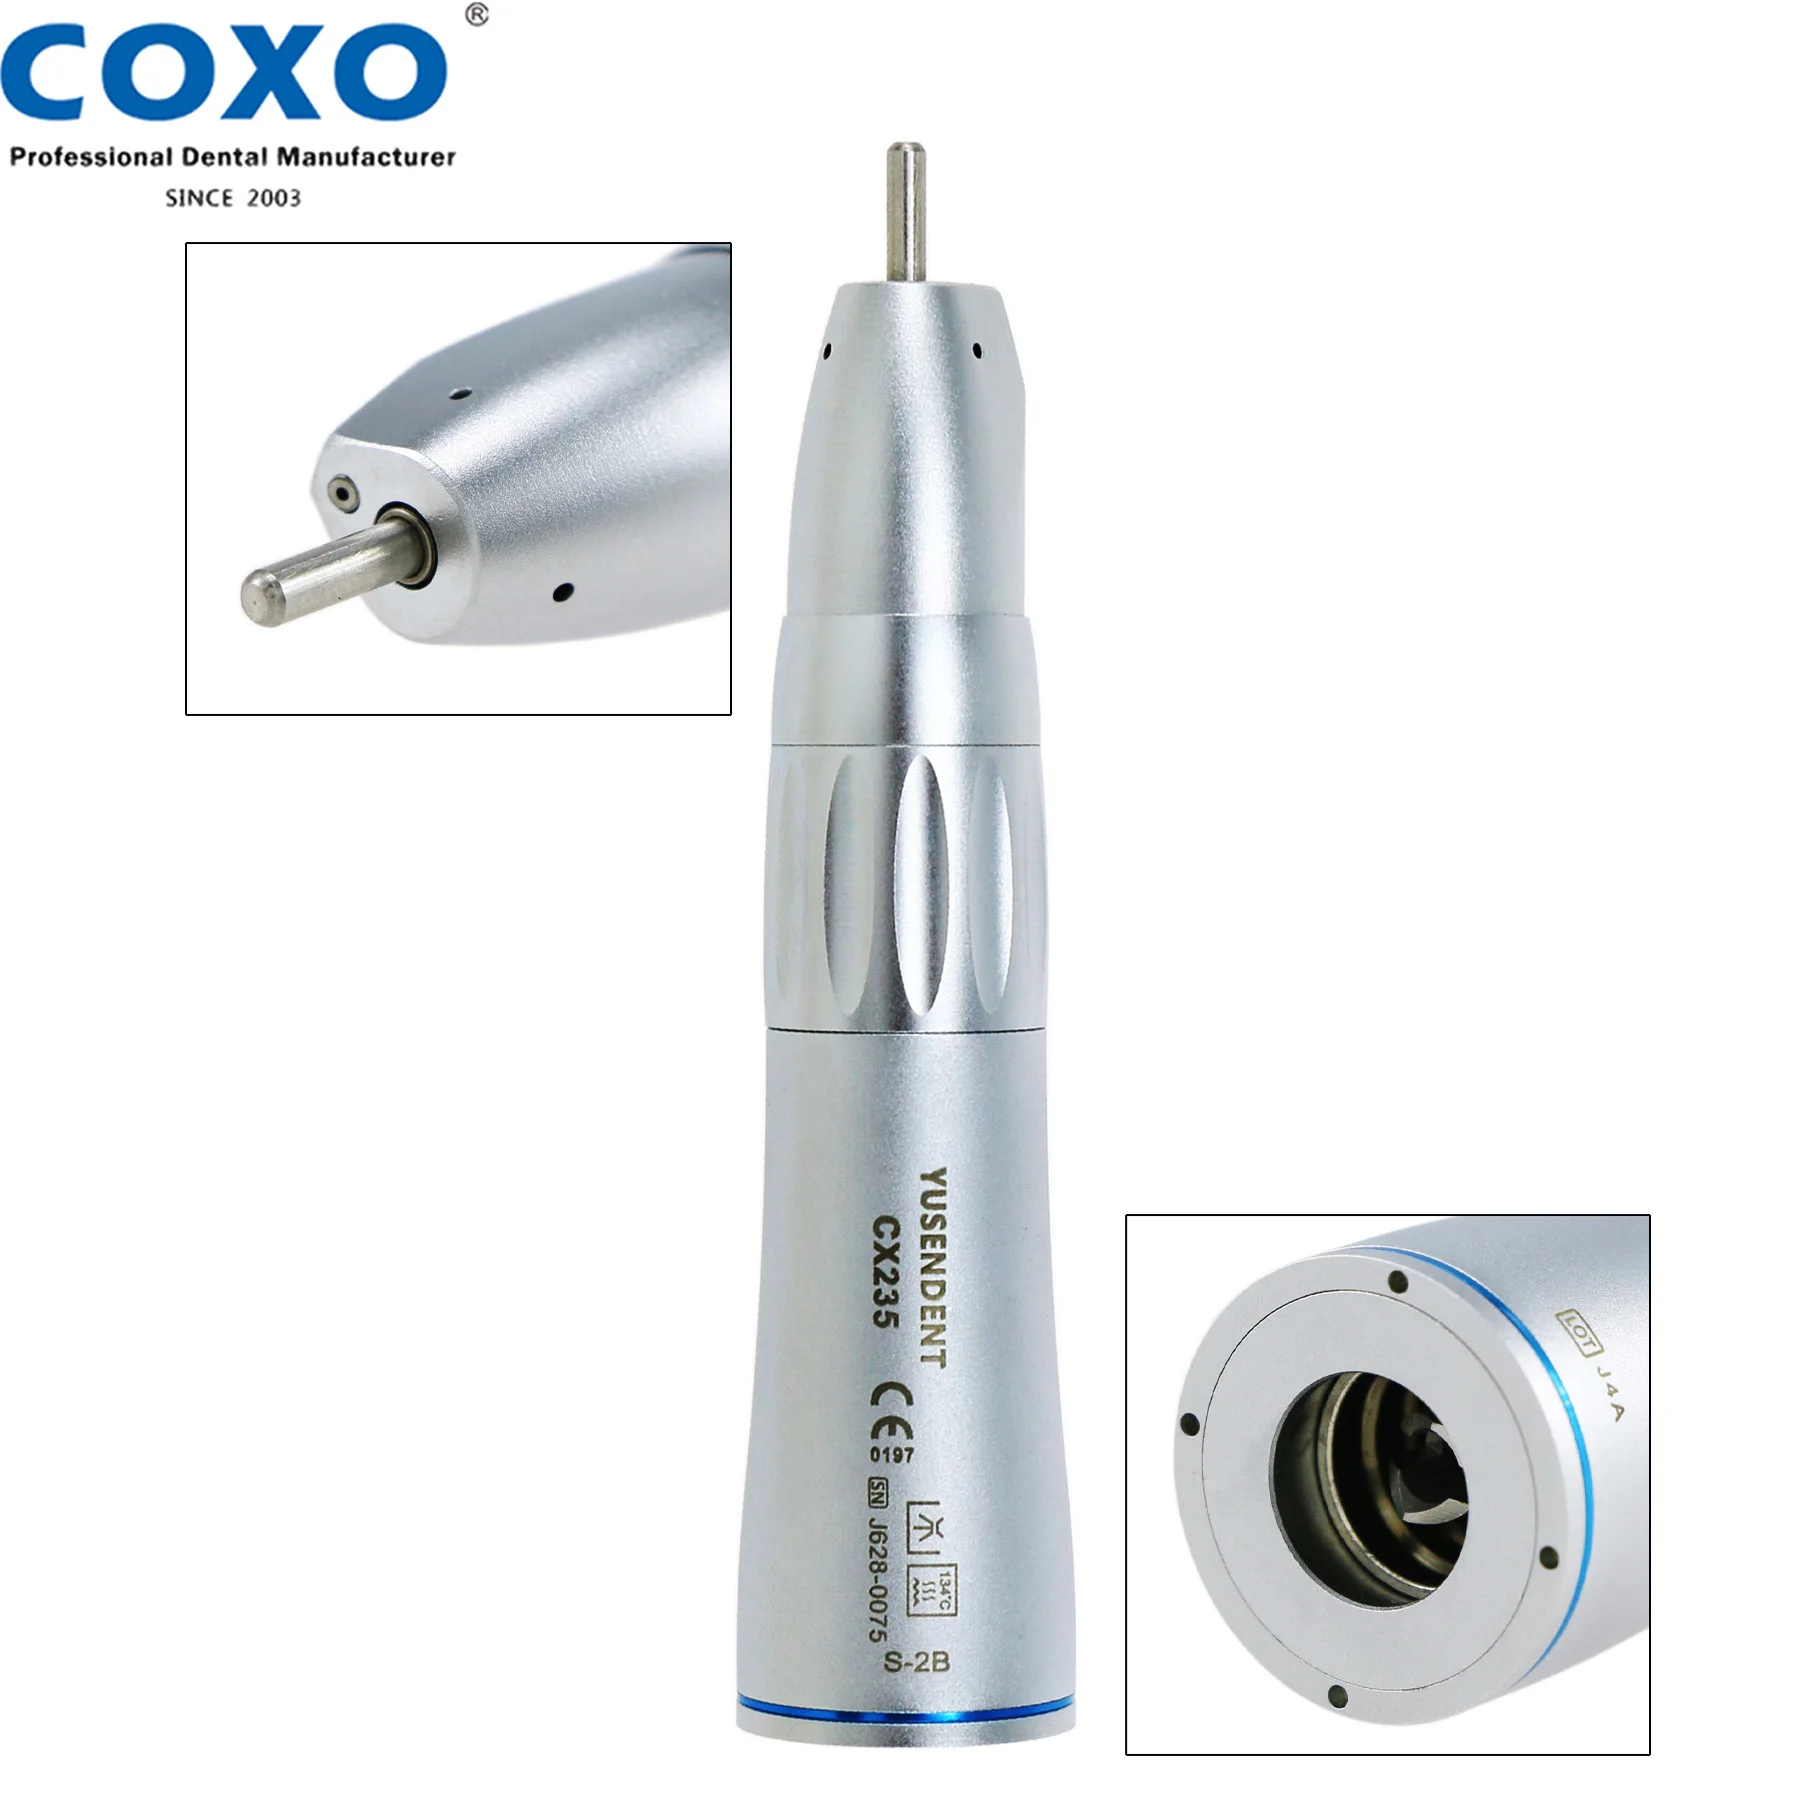 COXO Low Speed Handpiece Dental Straight Nose Cone Handpiece 1:1 Inner Water ISO E-type fit KAVO NSK Air Motor